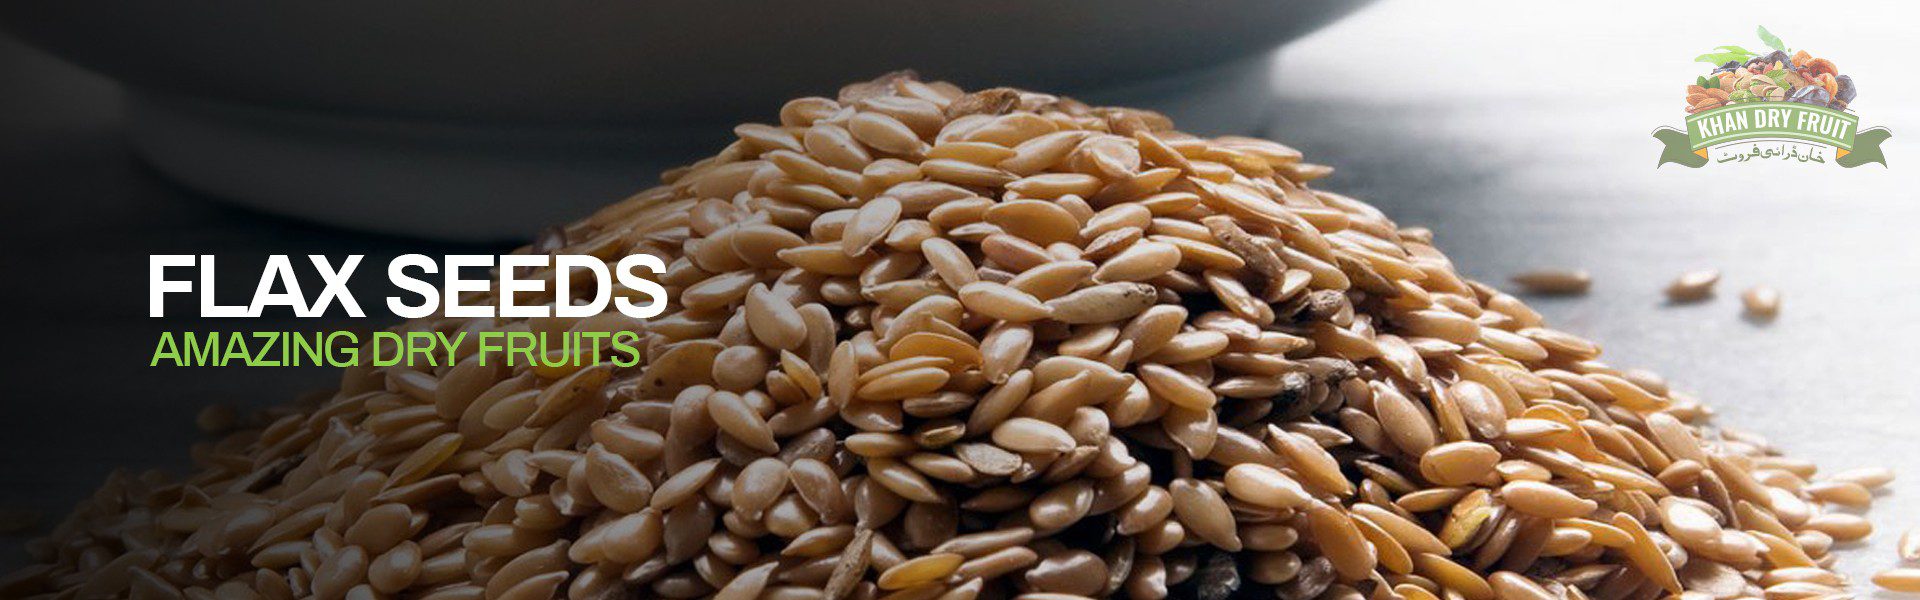 Flax Seeds a Dried Fruits in Pakistan Online Seller of Flax Seeds